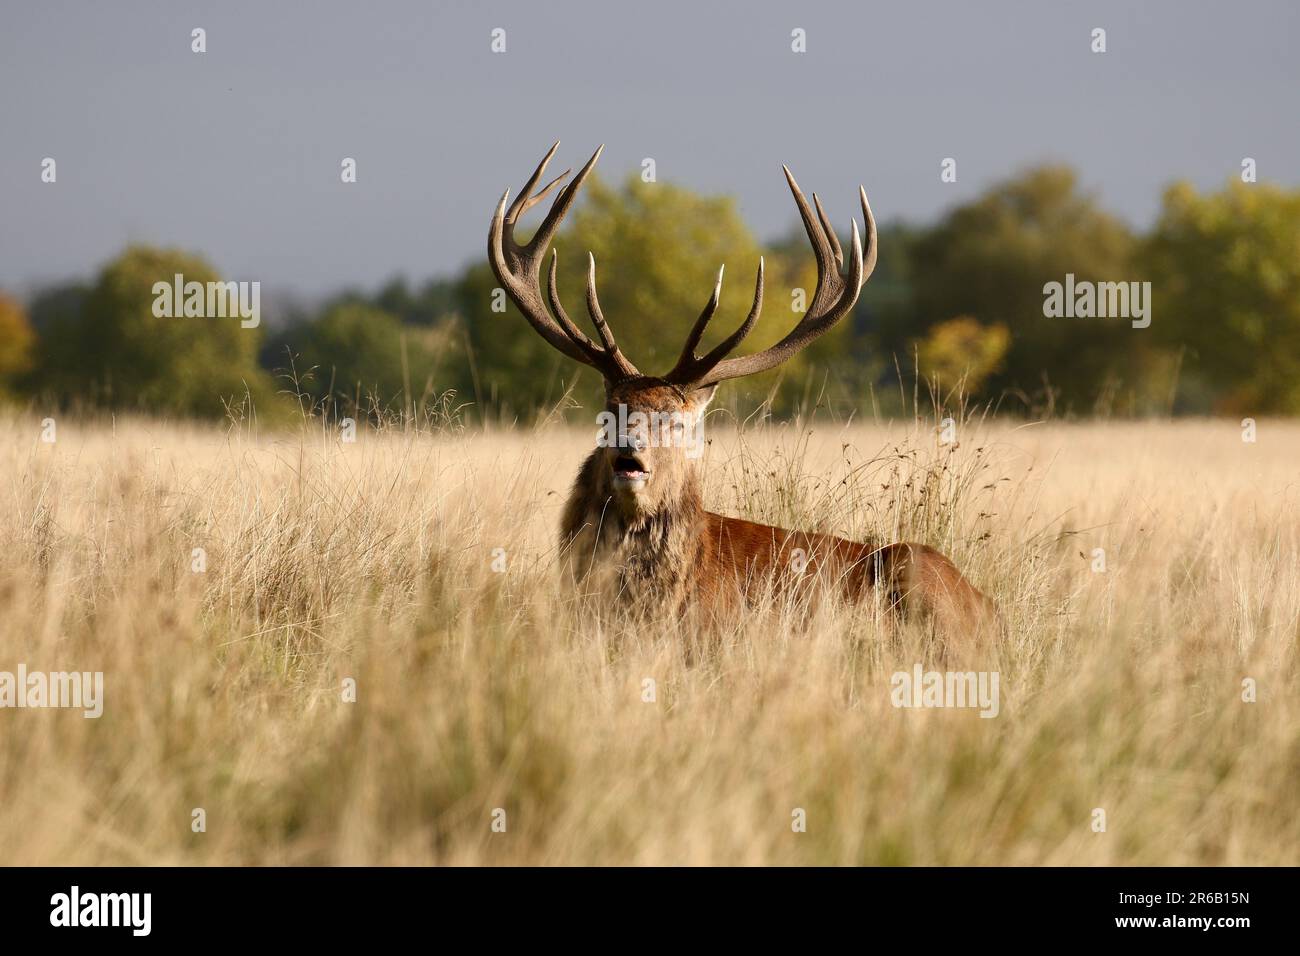 Stag bellowing in a field during rutting season Stock Photo